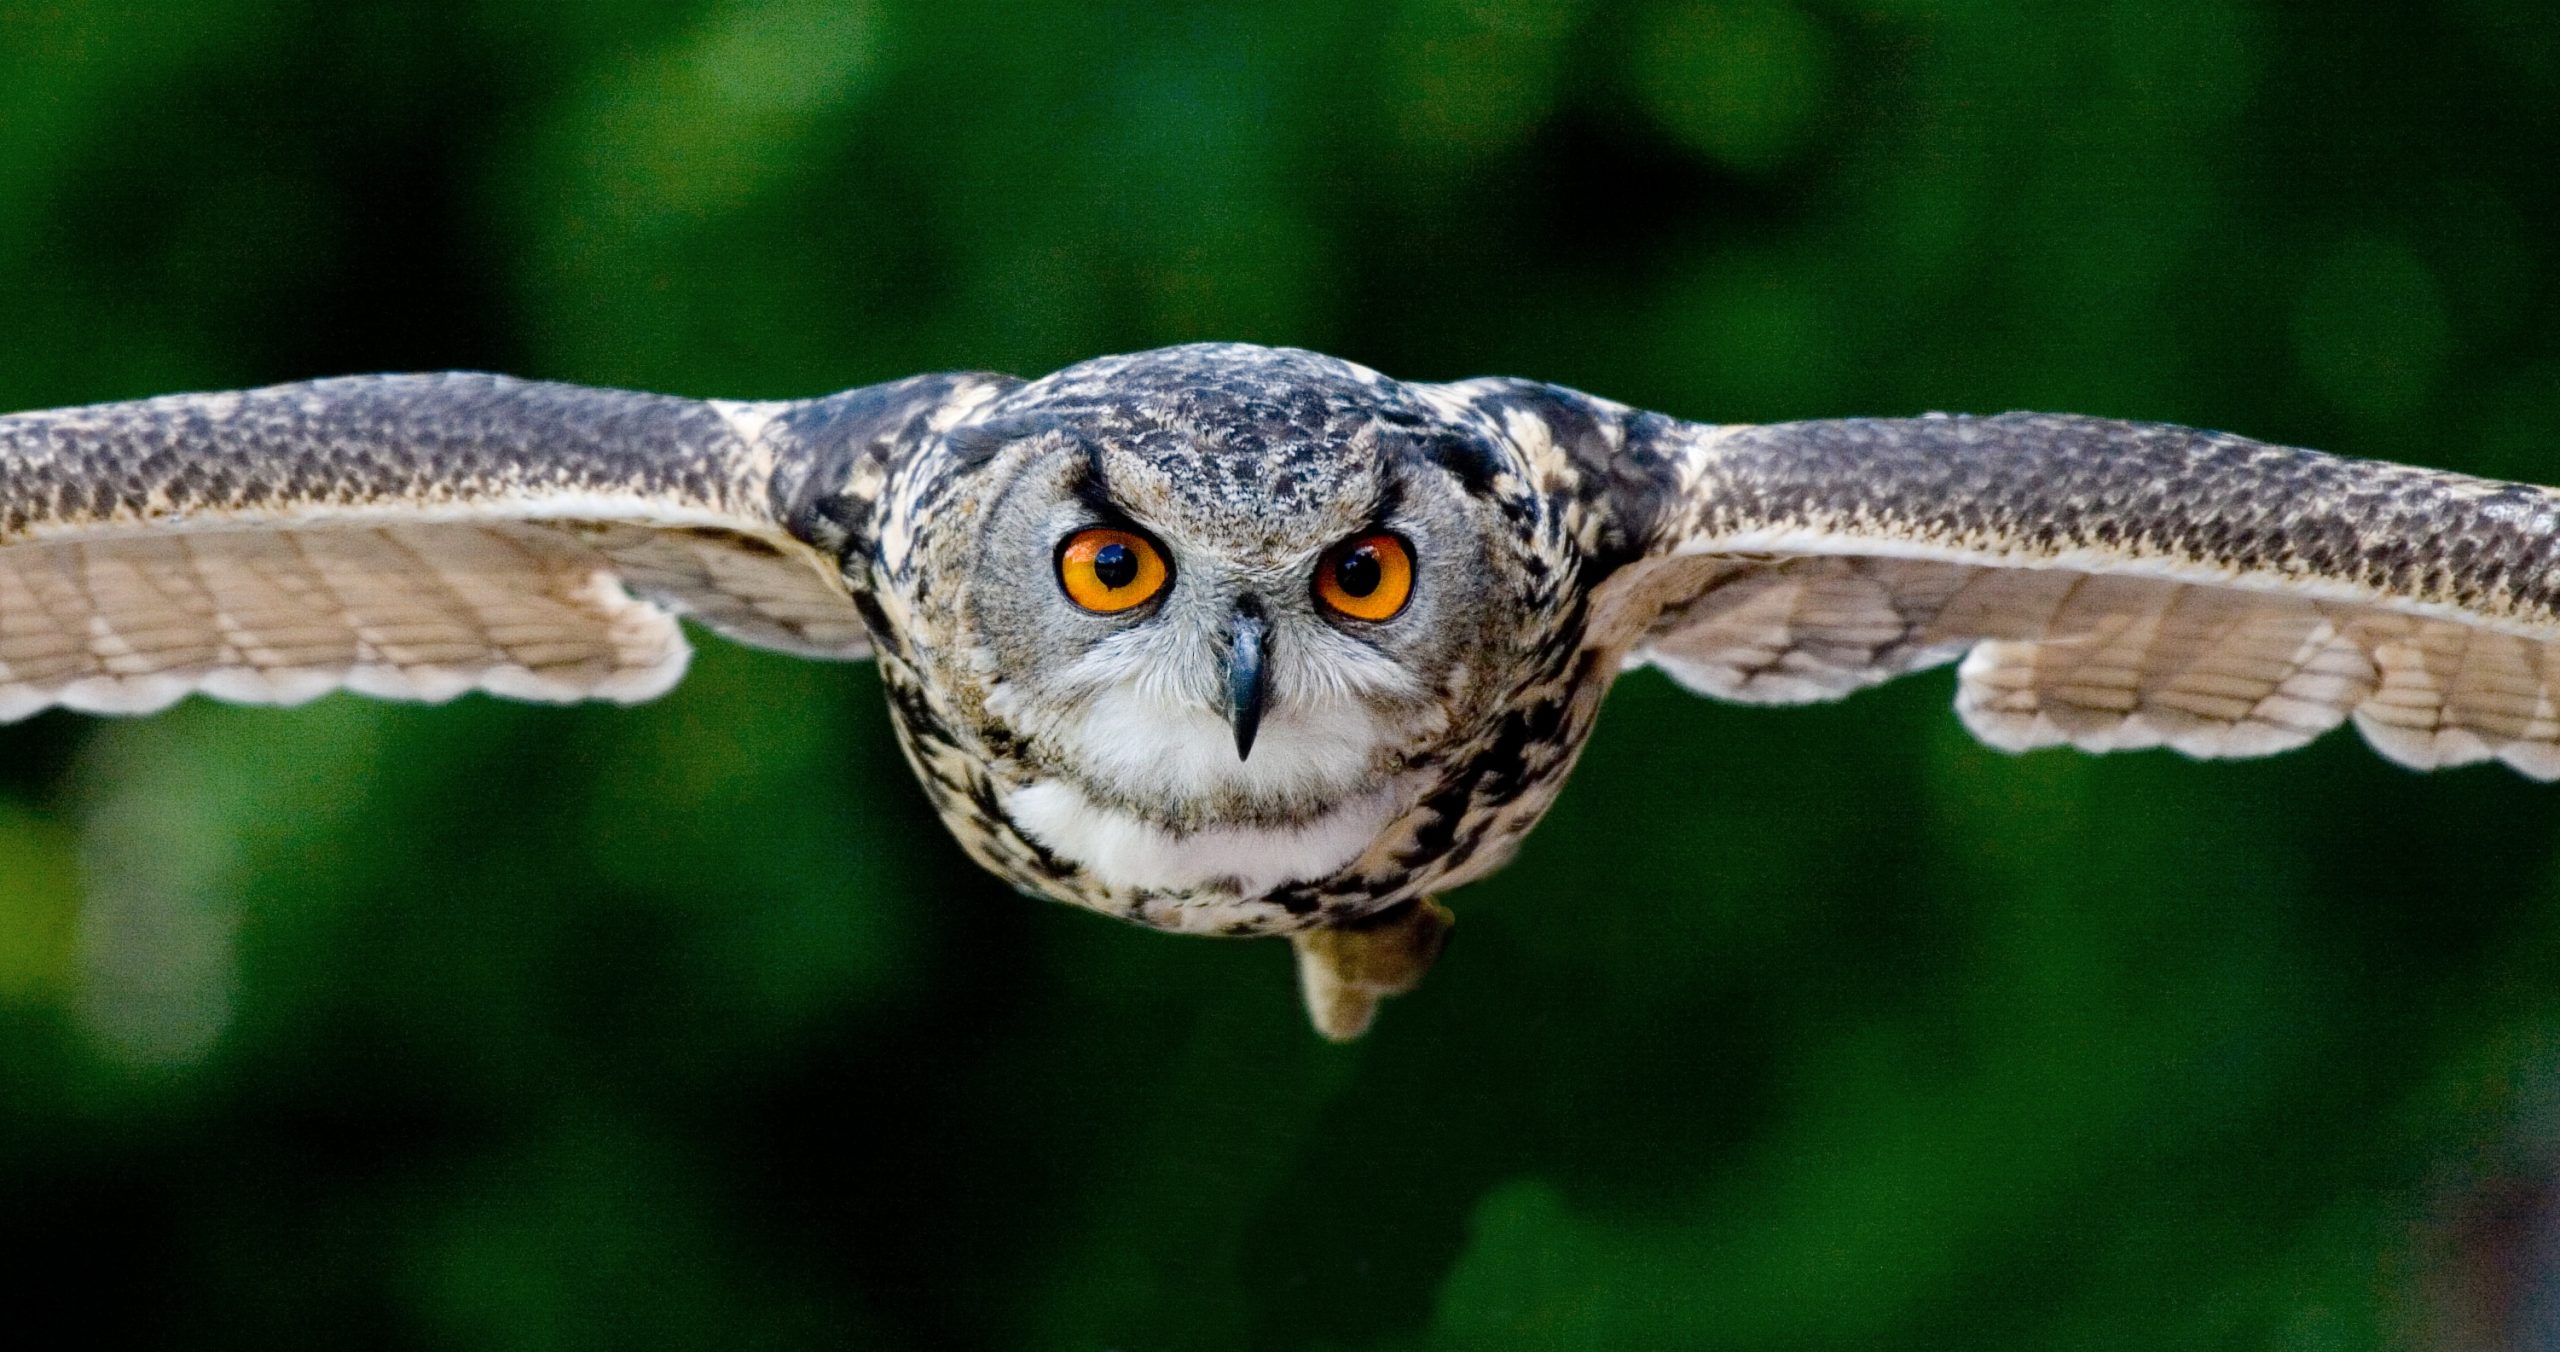 "Owl in flight included in Owl Quotes post"